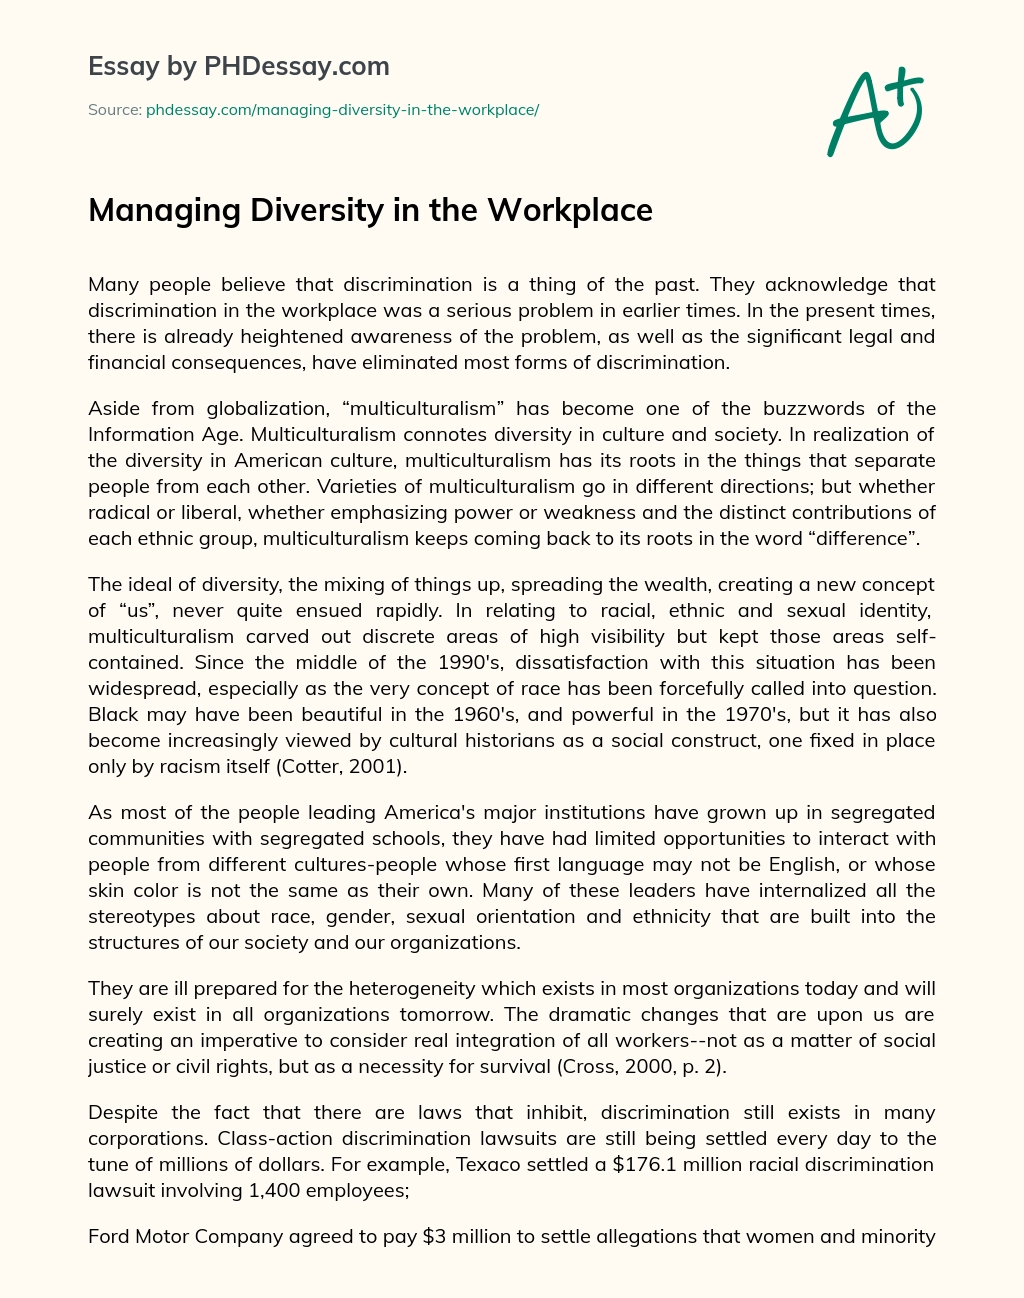 Managing Diversity in the Workplace essay